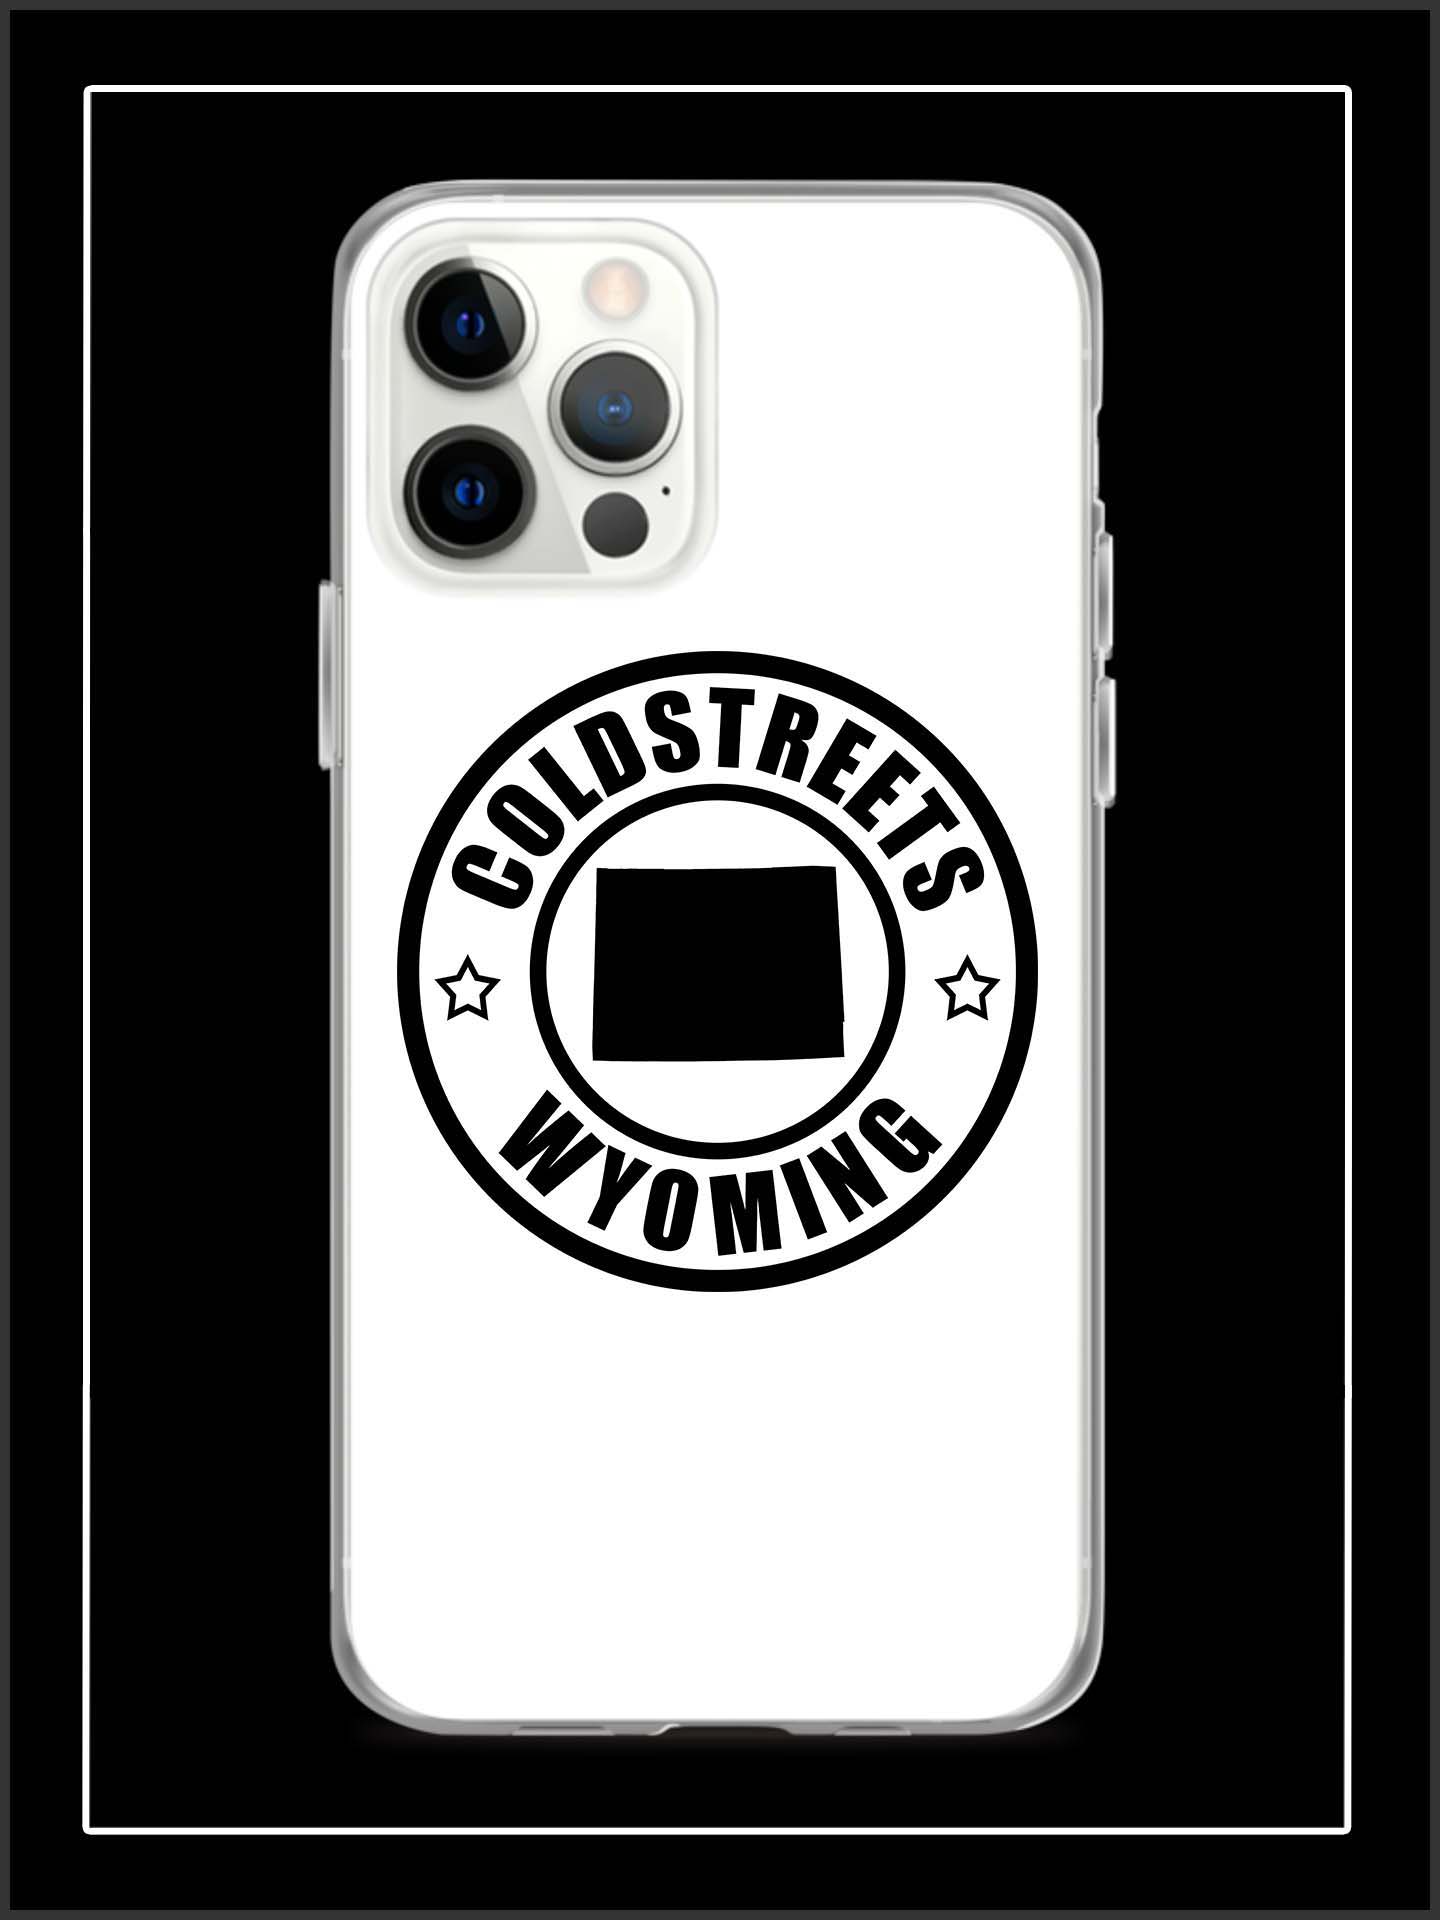 Cold Streets Wyoming iPhone Cases